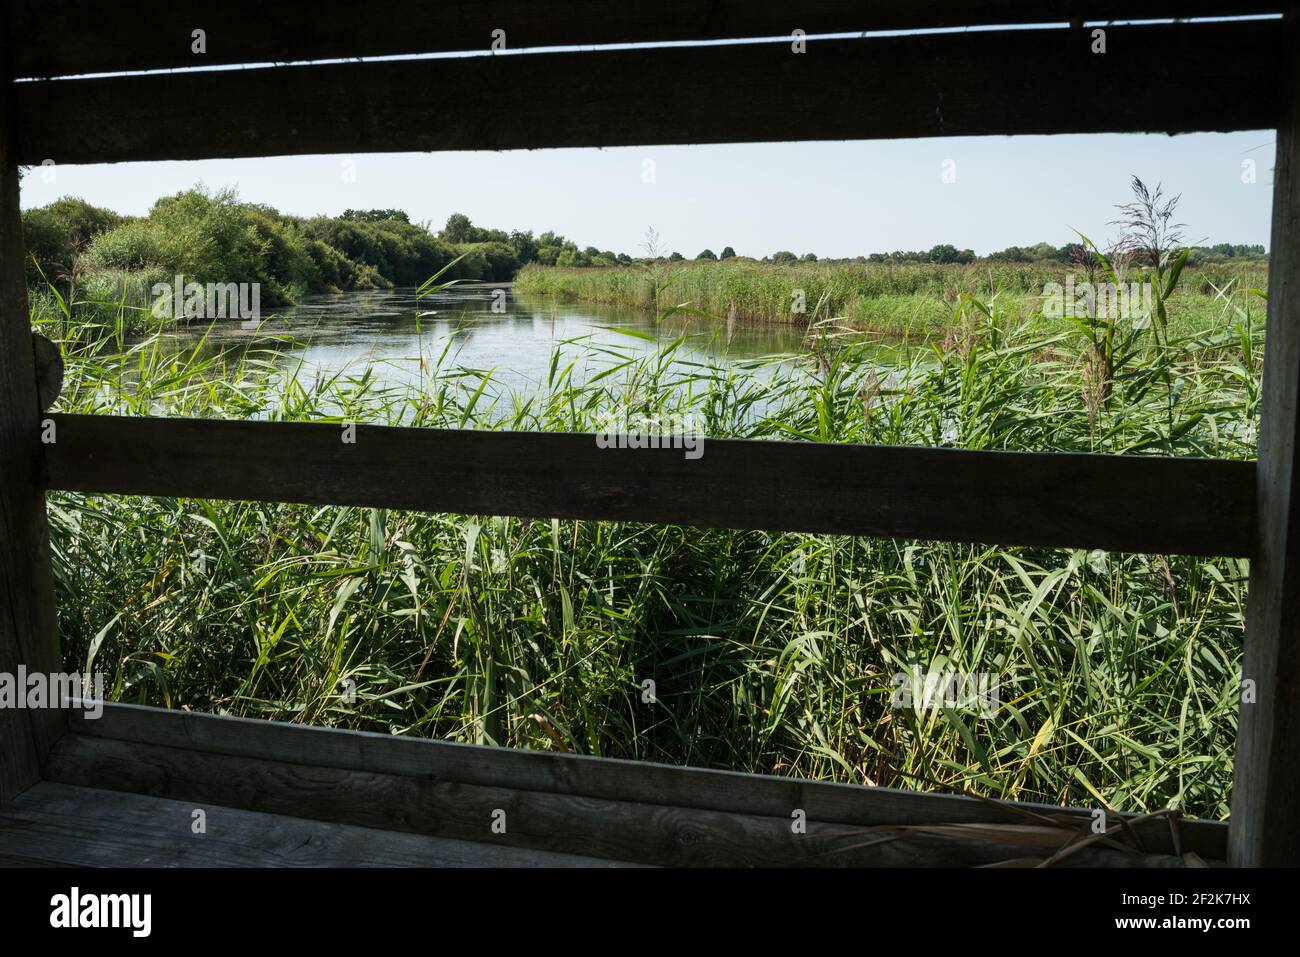 Ham Wall RSPB Nature Reserve in the Somerset Levels, UK. Stock Photo